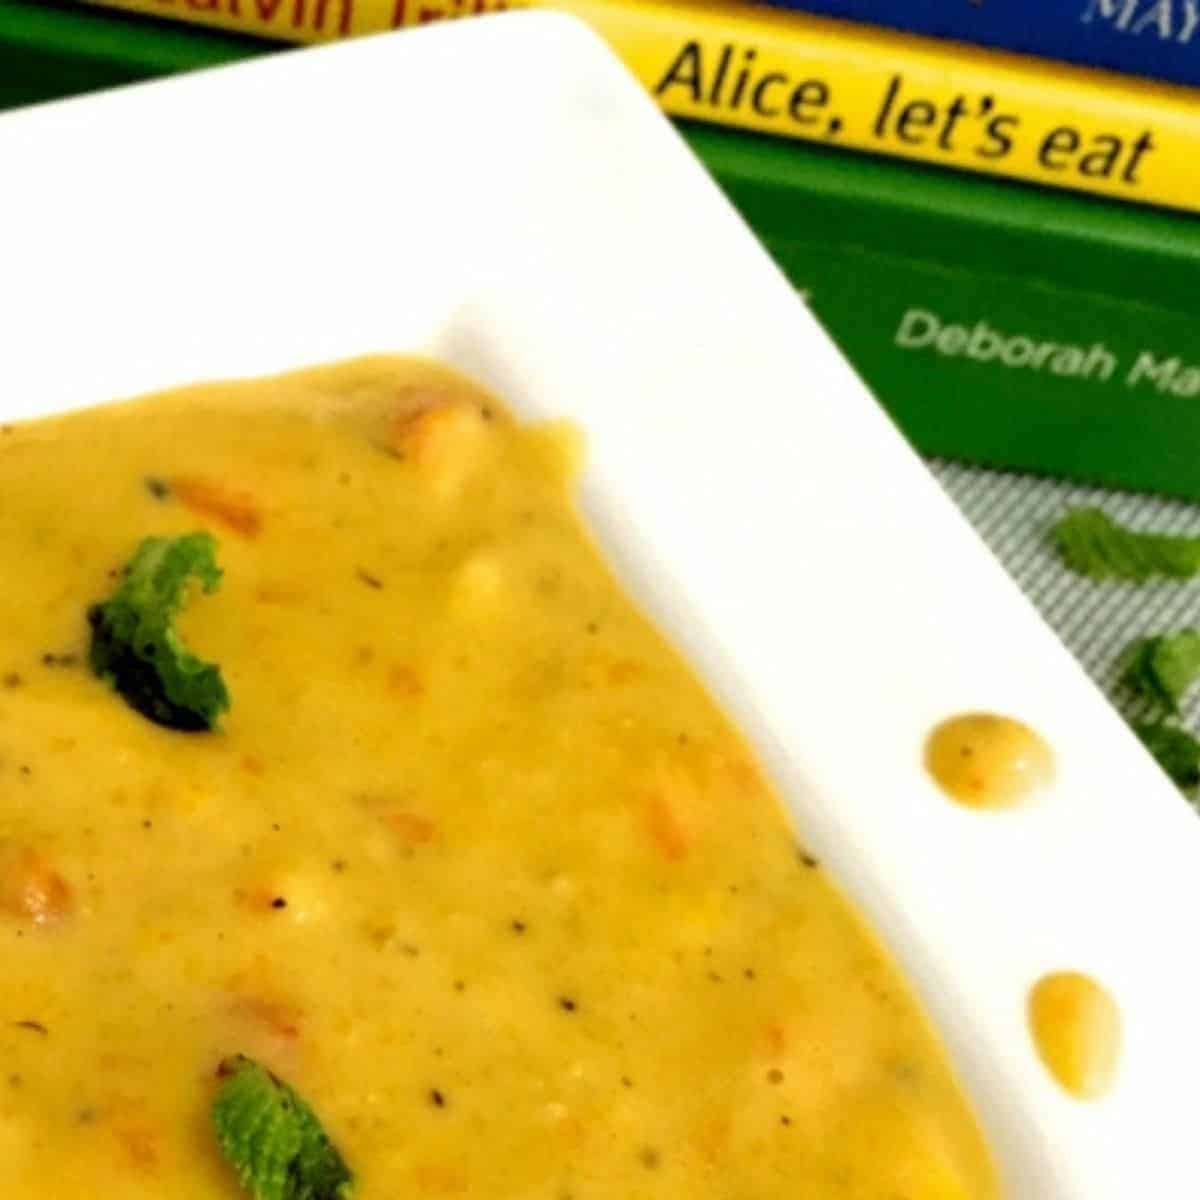 A broad white edged plate iwth yellow orangey vegetable corn chowder, garnished with mint leaves and flecked with black pepper. Green and yellow food books seen in the background